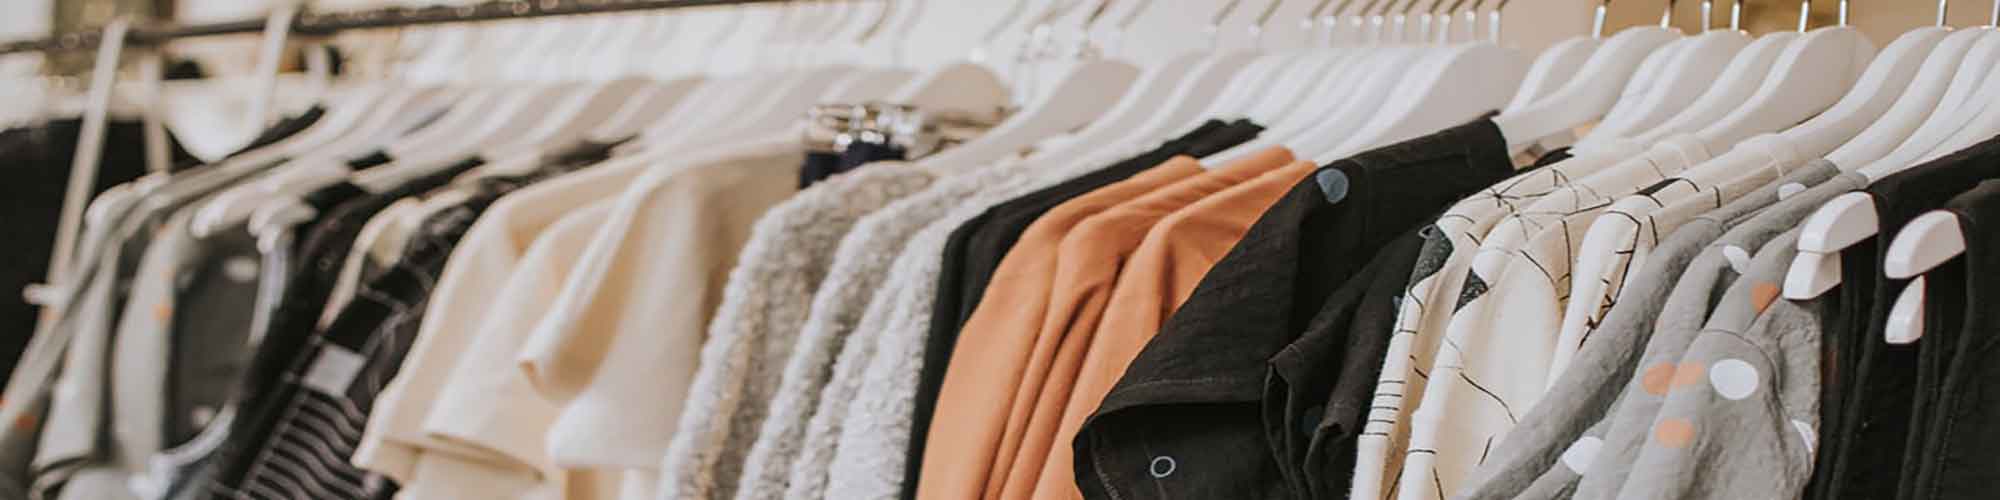 Are Fashion Translation Services A Good Fit for Your Business?